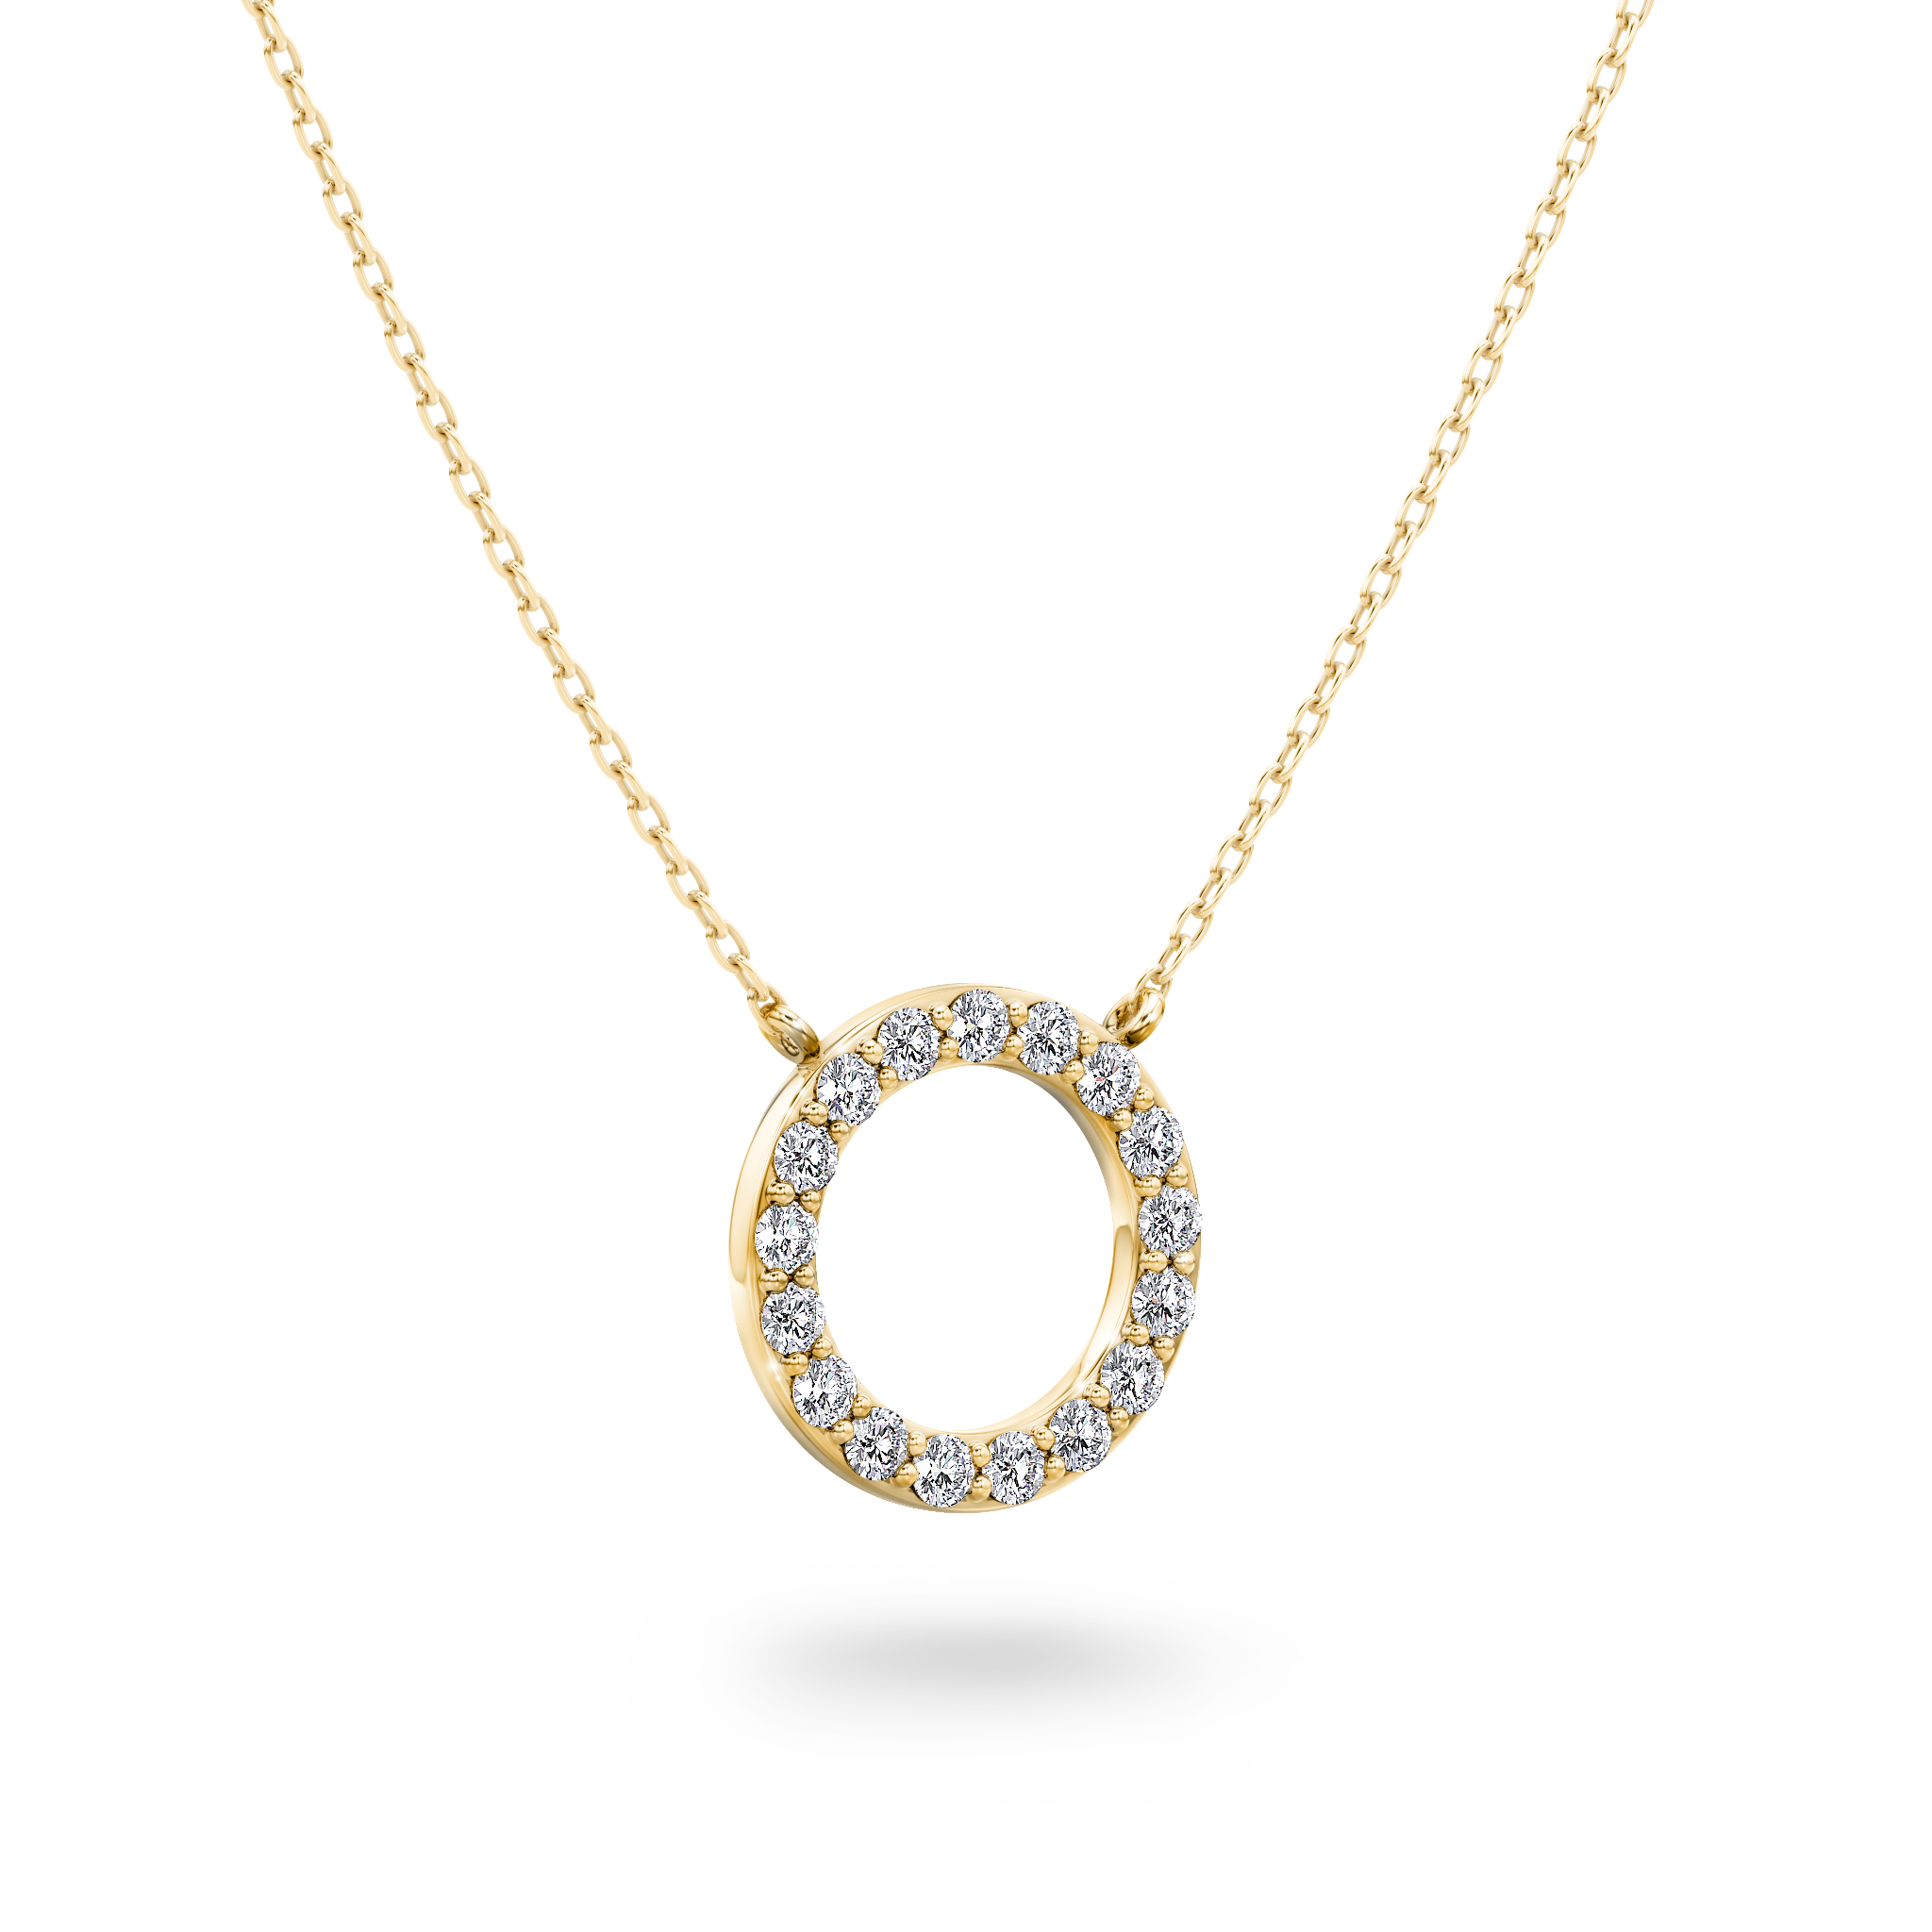 Shimansky - Circle of Life Microset Diamond Necklace crafted in 14K Yellow Gold